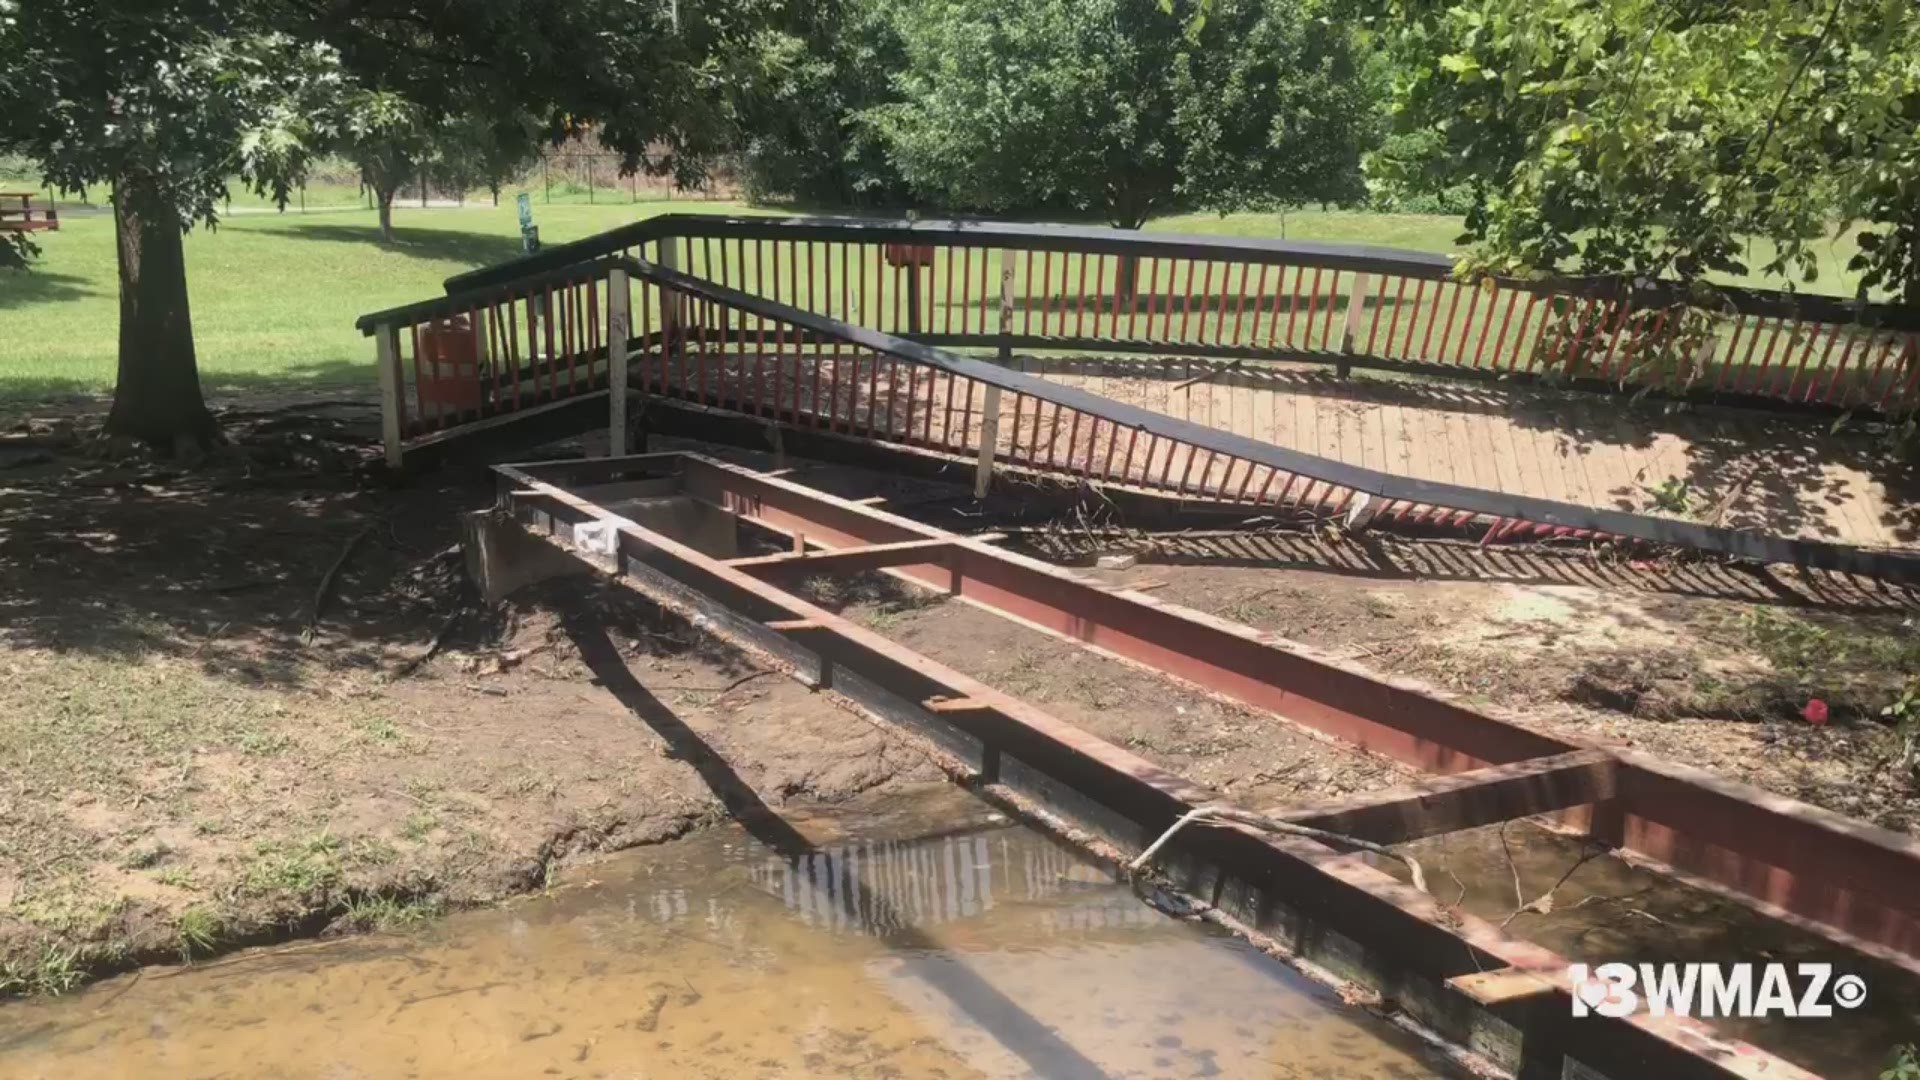 After a round of strong to severe storms Friday in Macon, the bridge washed out at the dog park located on Adams Street.